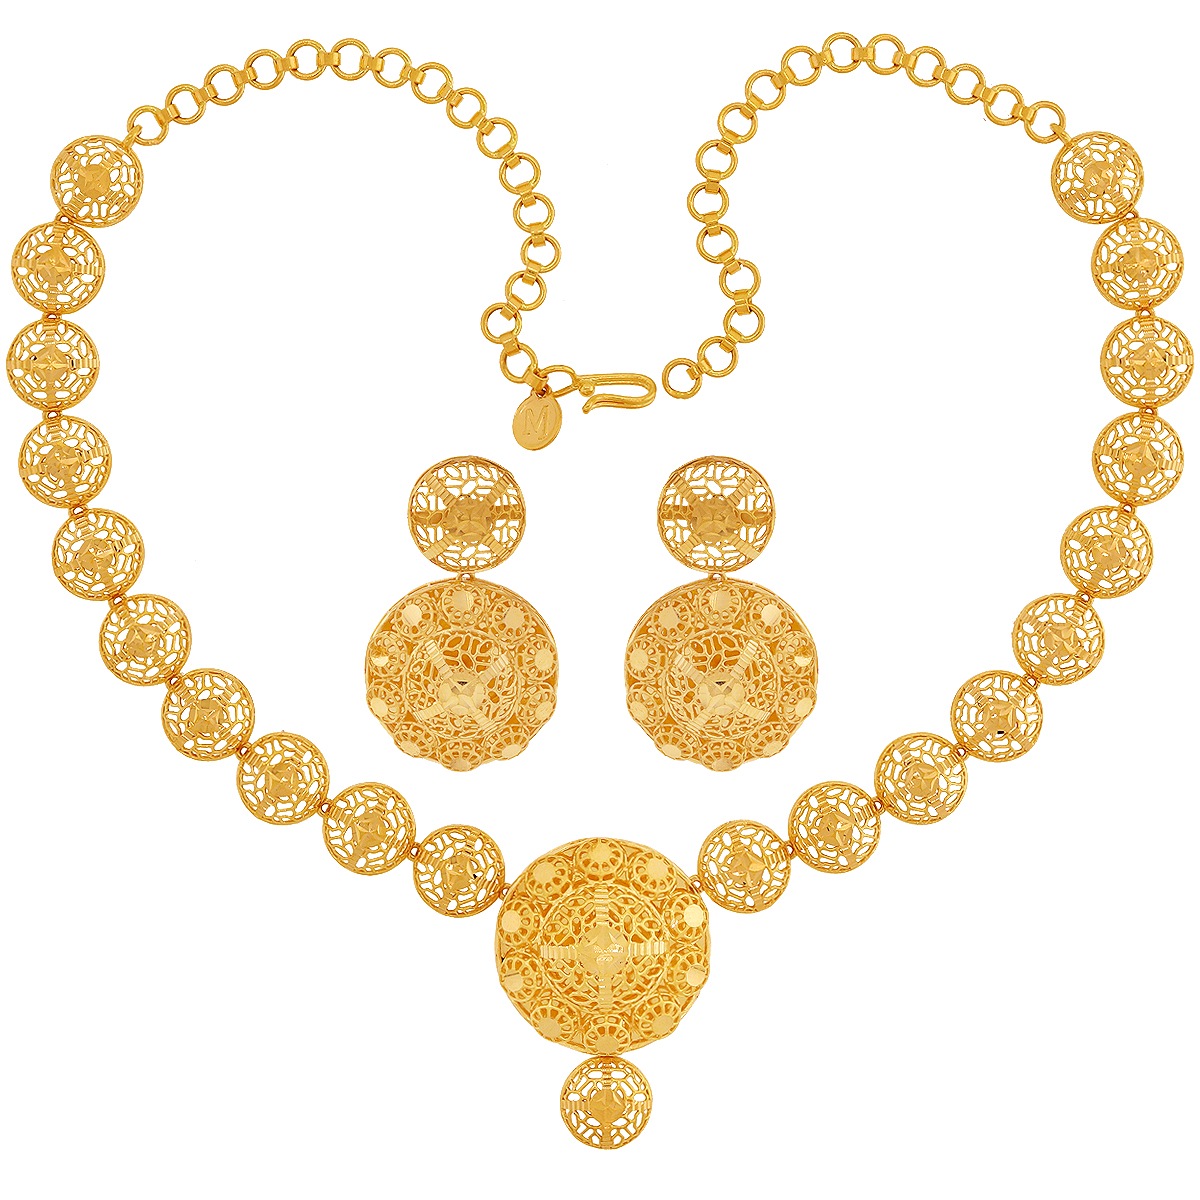 Malani Jewelers | Alluring Necklace Set in 22K Gold